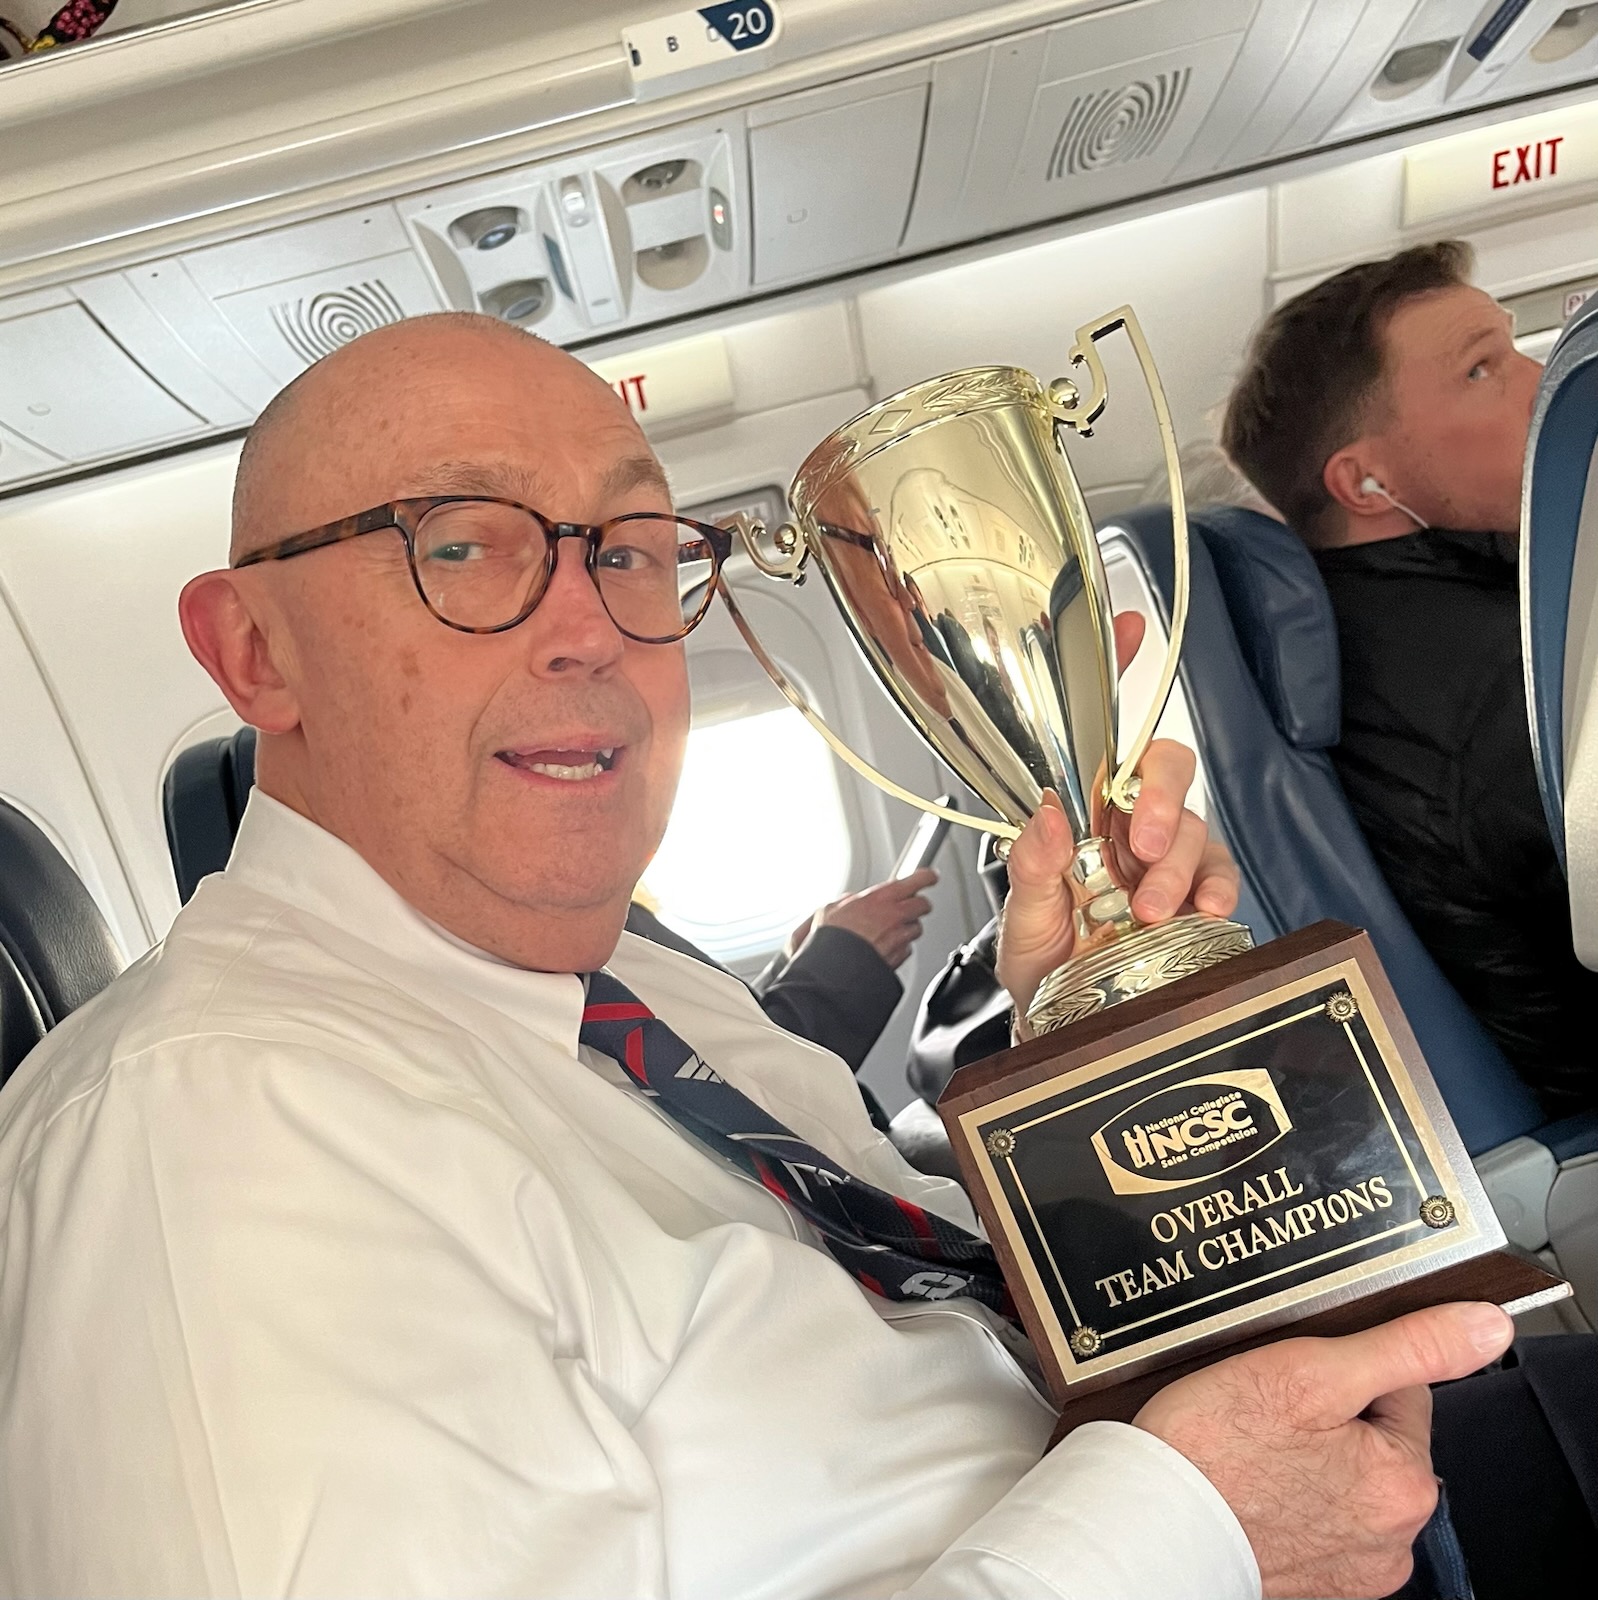 Tony Krystofik, the Director of the Fiore Talarico Center for Professional Selling and Sales Coach holding the trophy on the way back home to Dayton. 